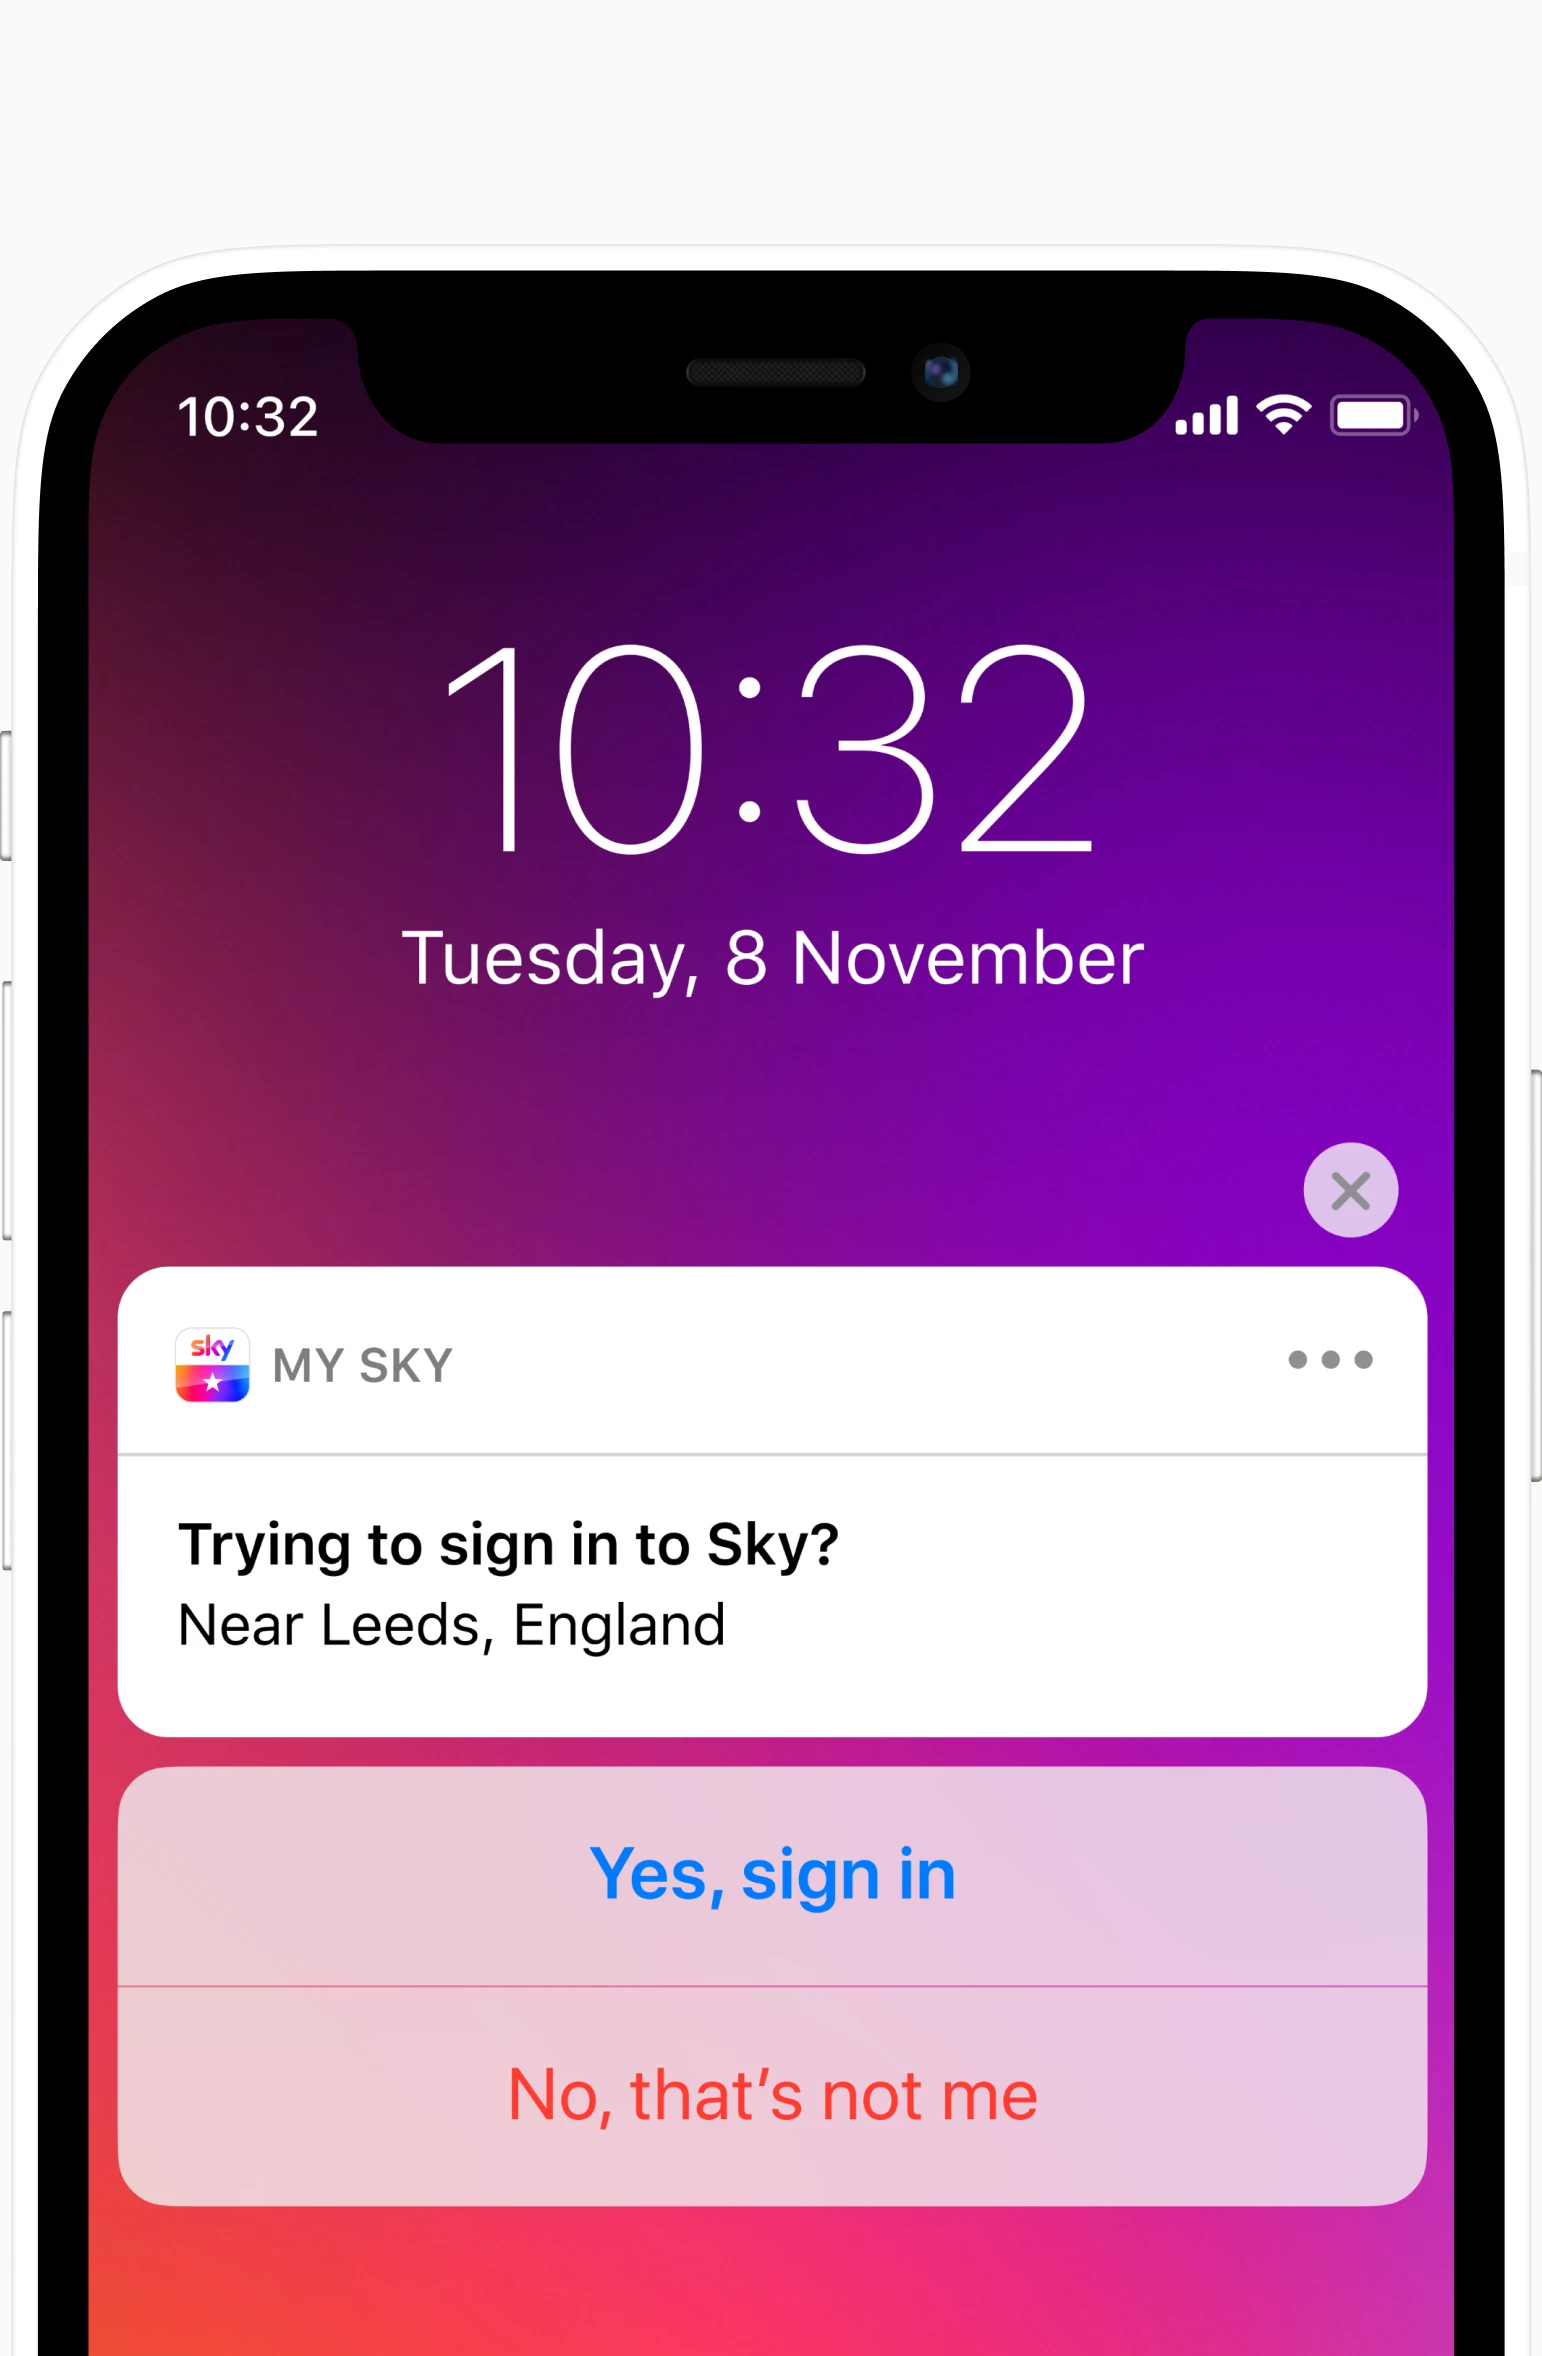 Mobile phone showing a notification asking the user if they are trying to sign in to Sky with 'yes, sign in' and 'no, that’s not me' options.